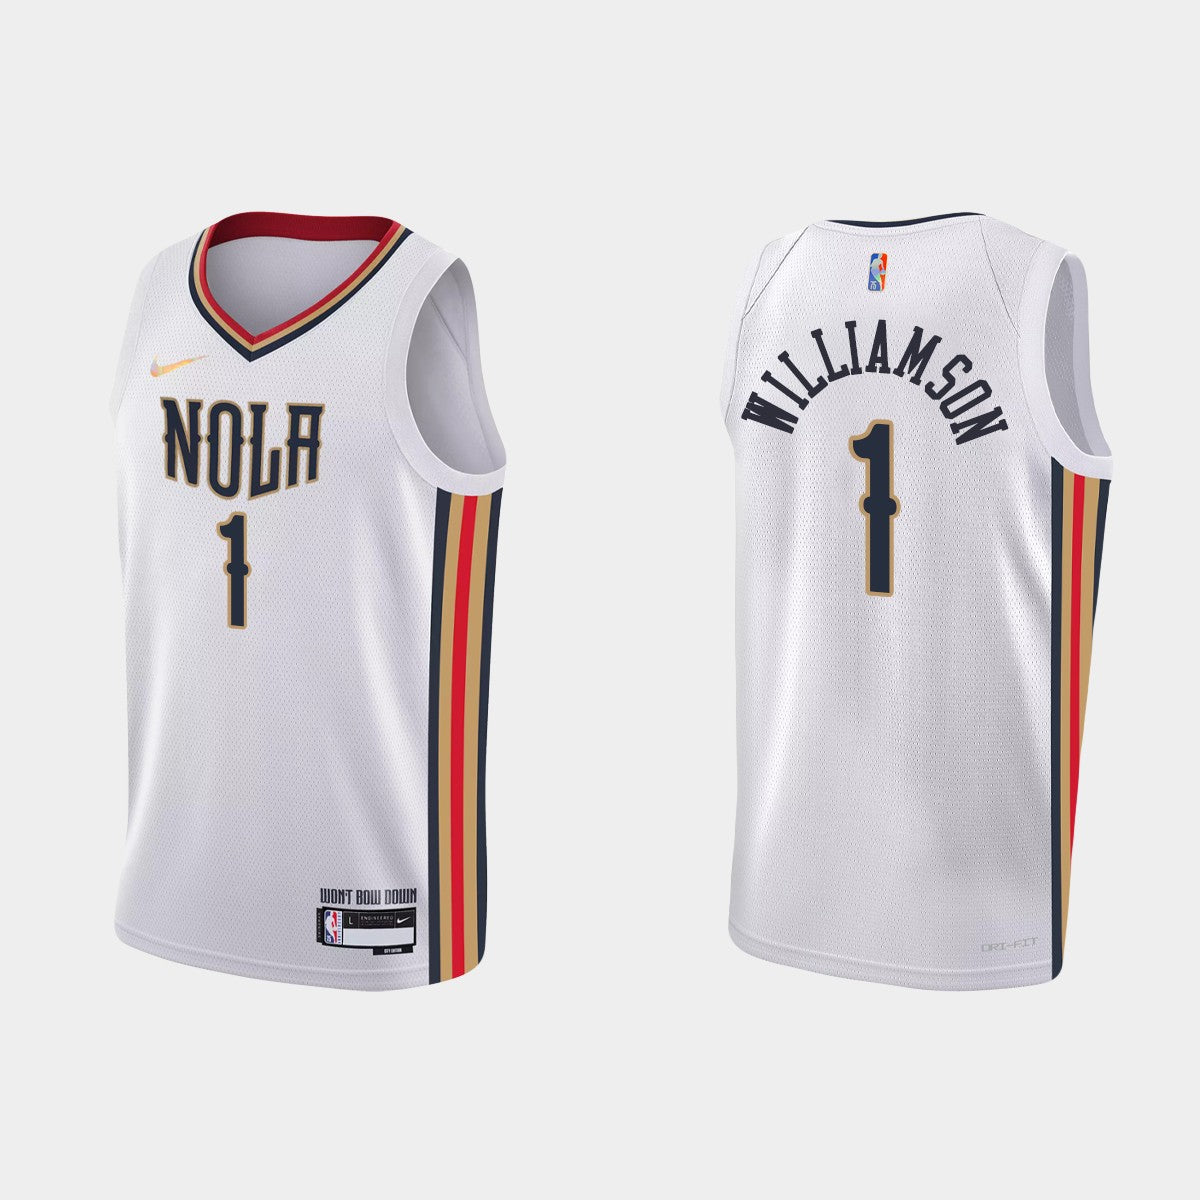 New Orleans Pelicans Jerseys in New Orleans Pelicans Team Shop 